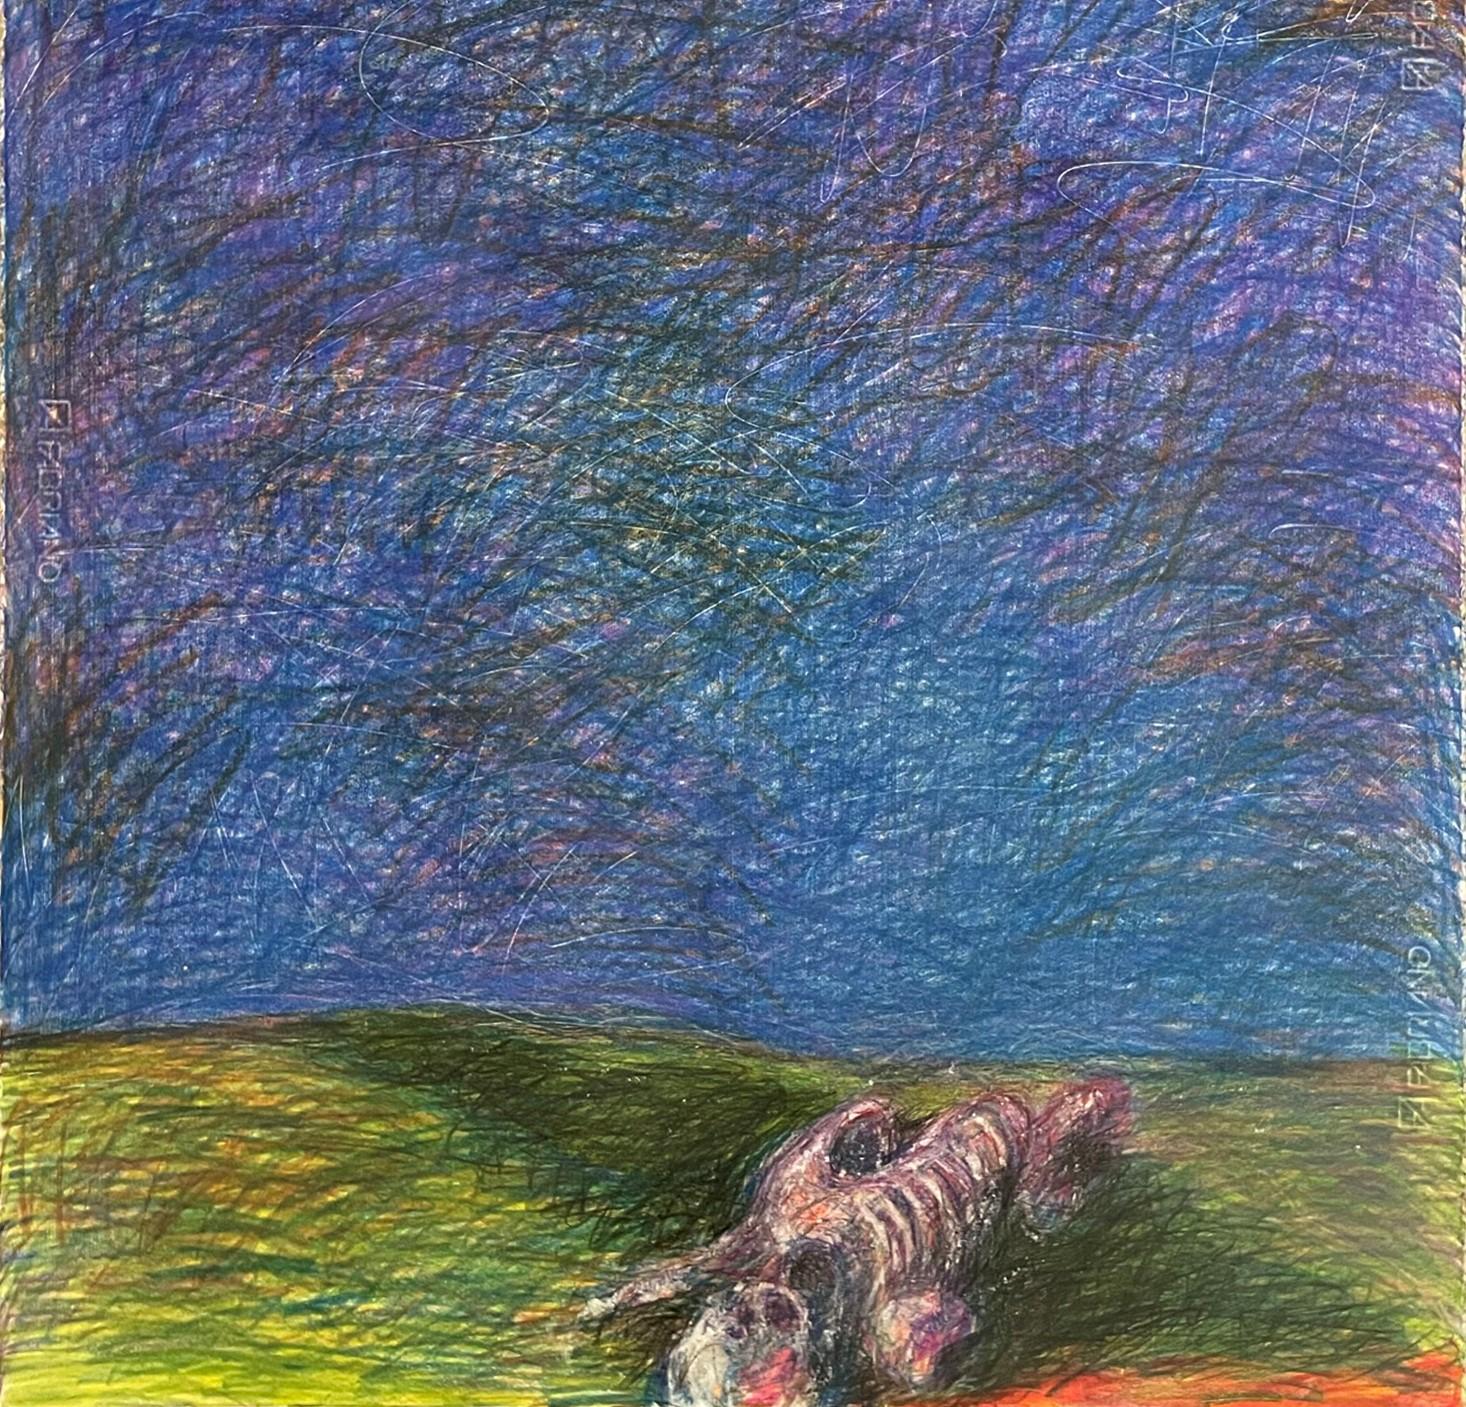 Untitled_Body on the Field #8 - 21st Century, Drawing, Blue, Green, Yellow - Neo-Expressionist Art by Zsolt Berszán